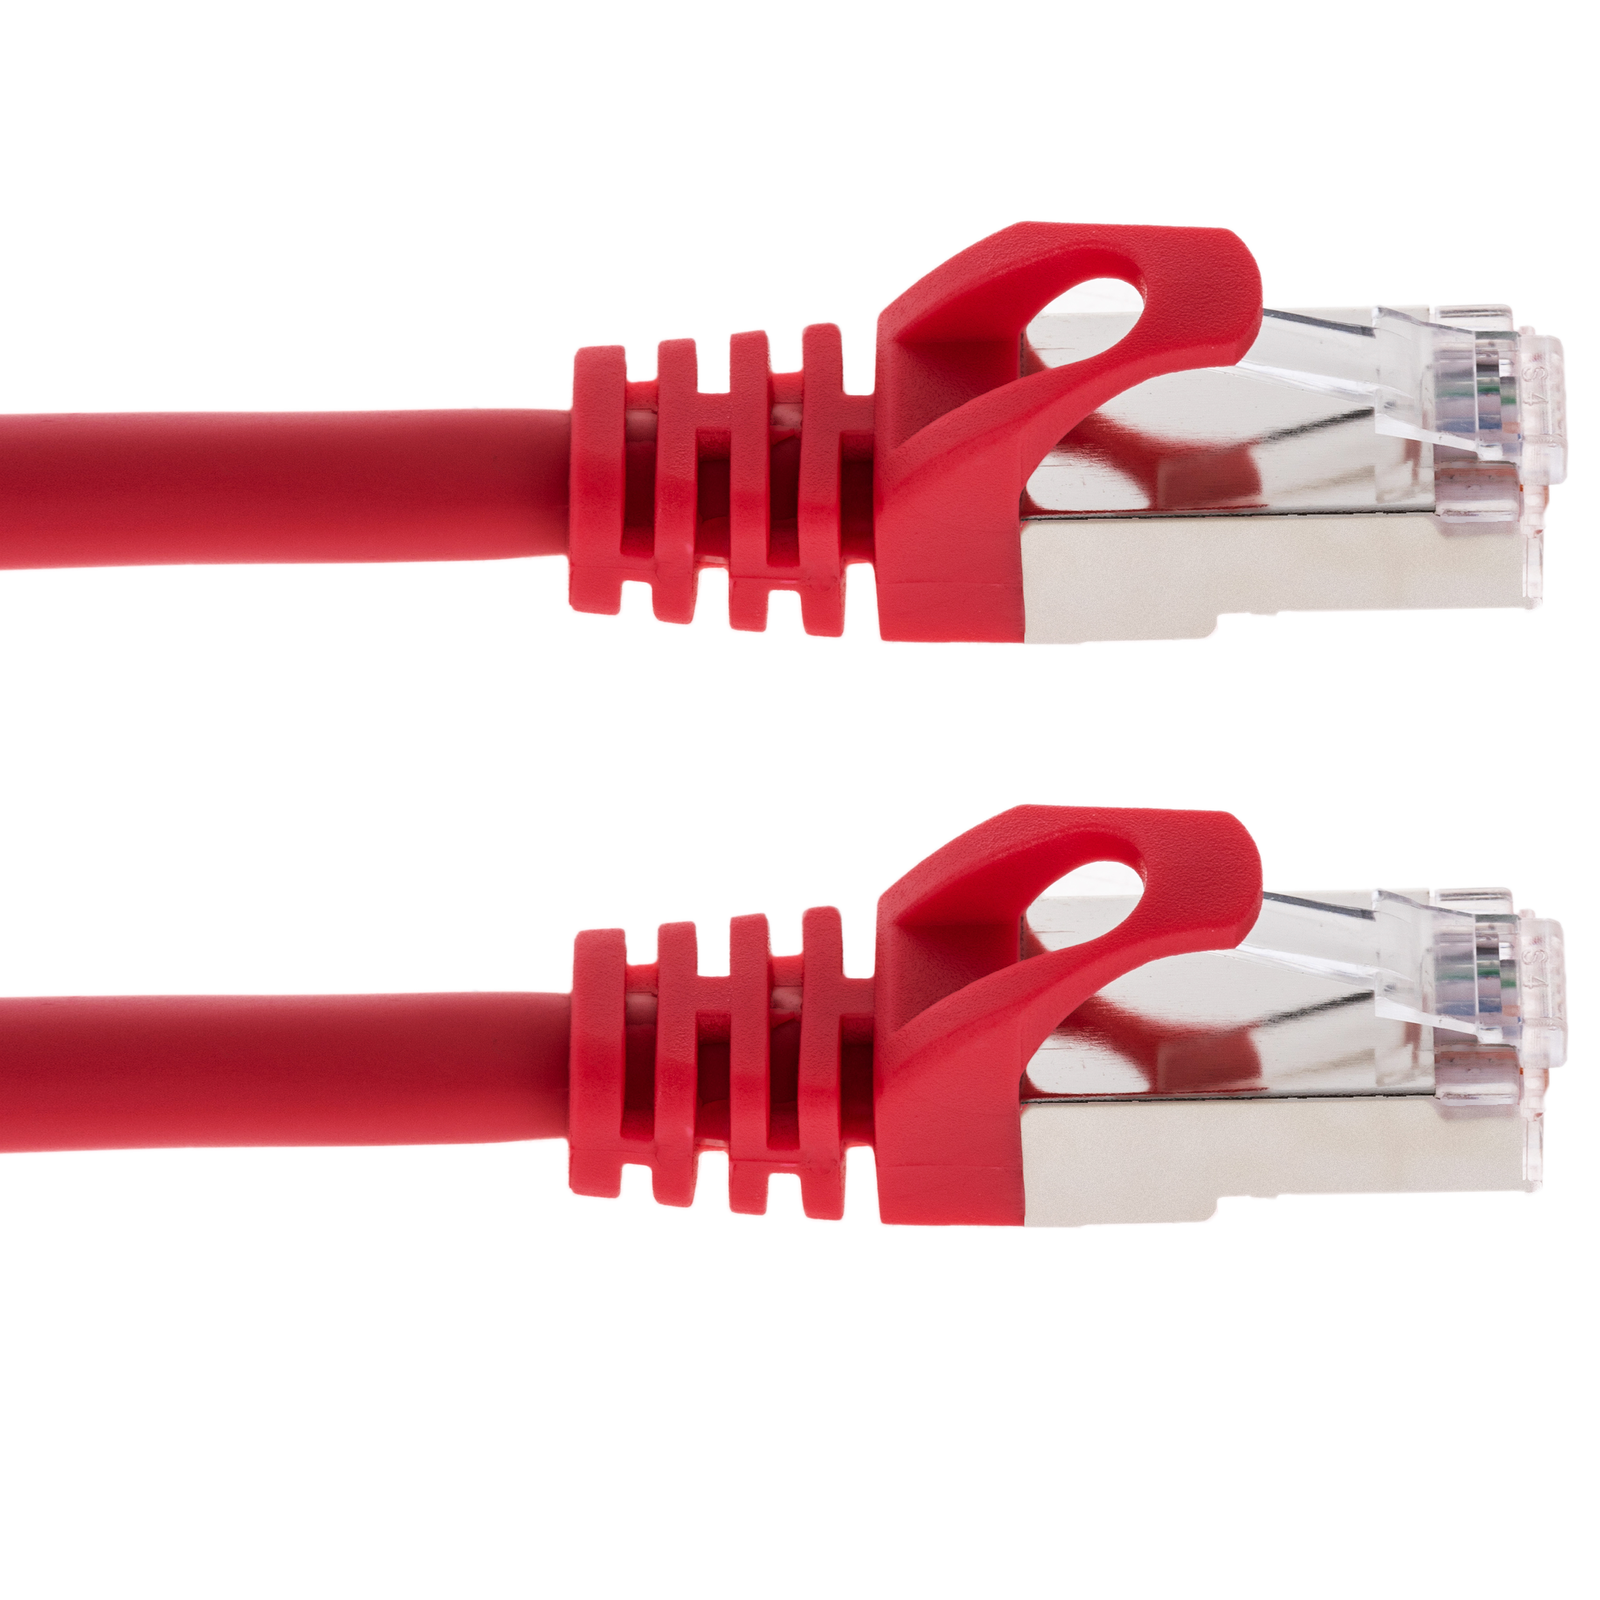 Cable Ethernet 3 Metros, Cat 6 Alta Velocidad Cable de Red FTP Blindado  Cable RJ45, Gigabit Cable LAN 3m Cable Internet, 250MHz 1000Mbps 23AWG,  Interior Impermeable Cable Wifi para PS5/4 Switch Rúter 